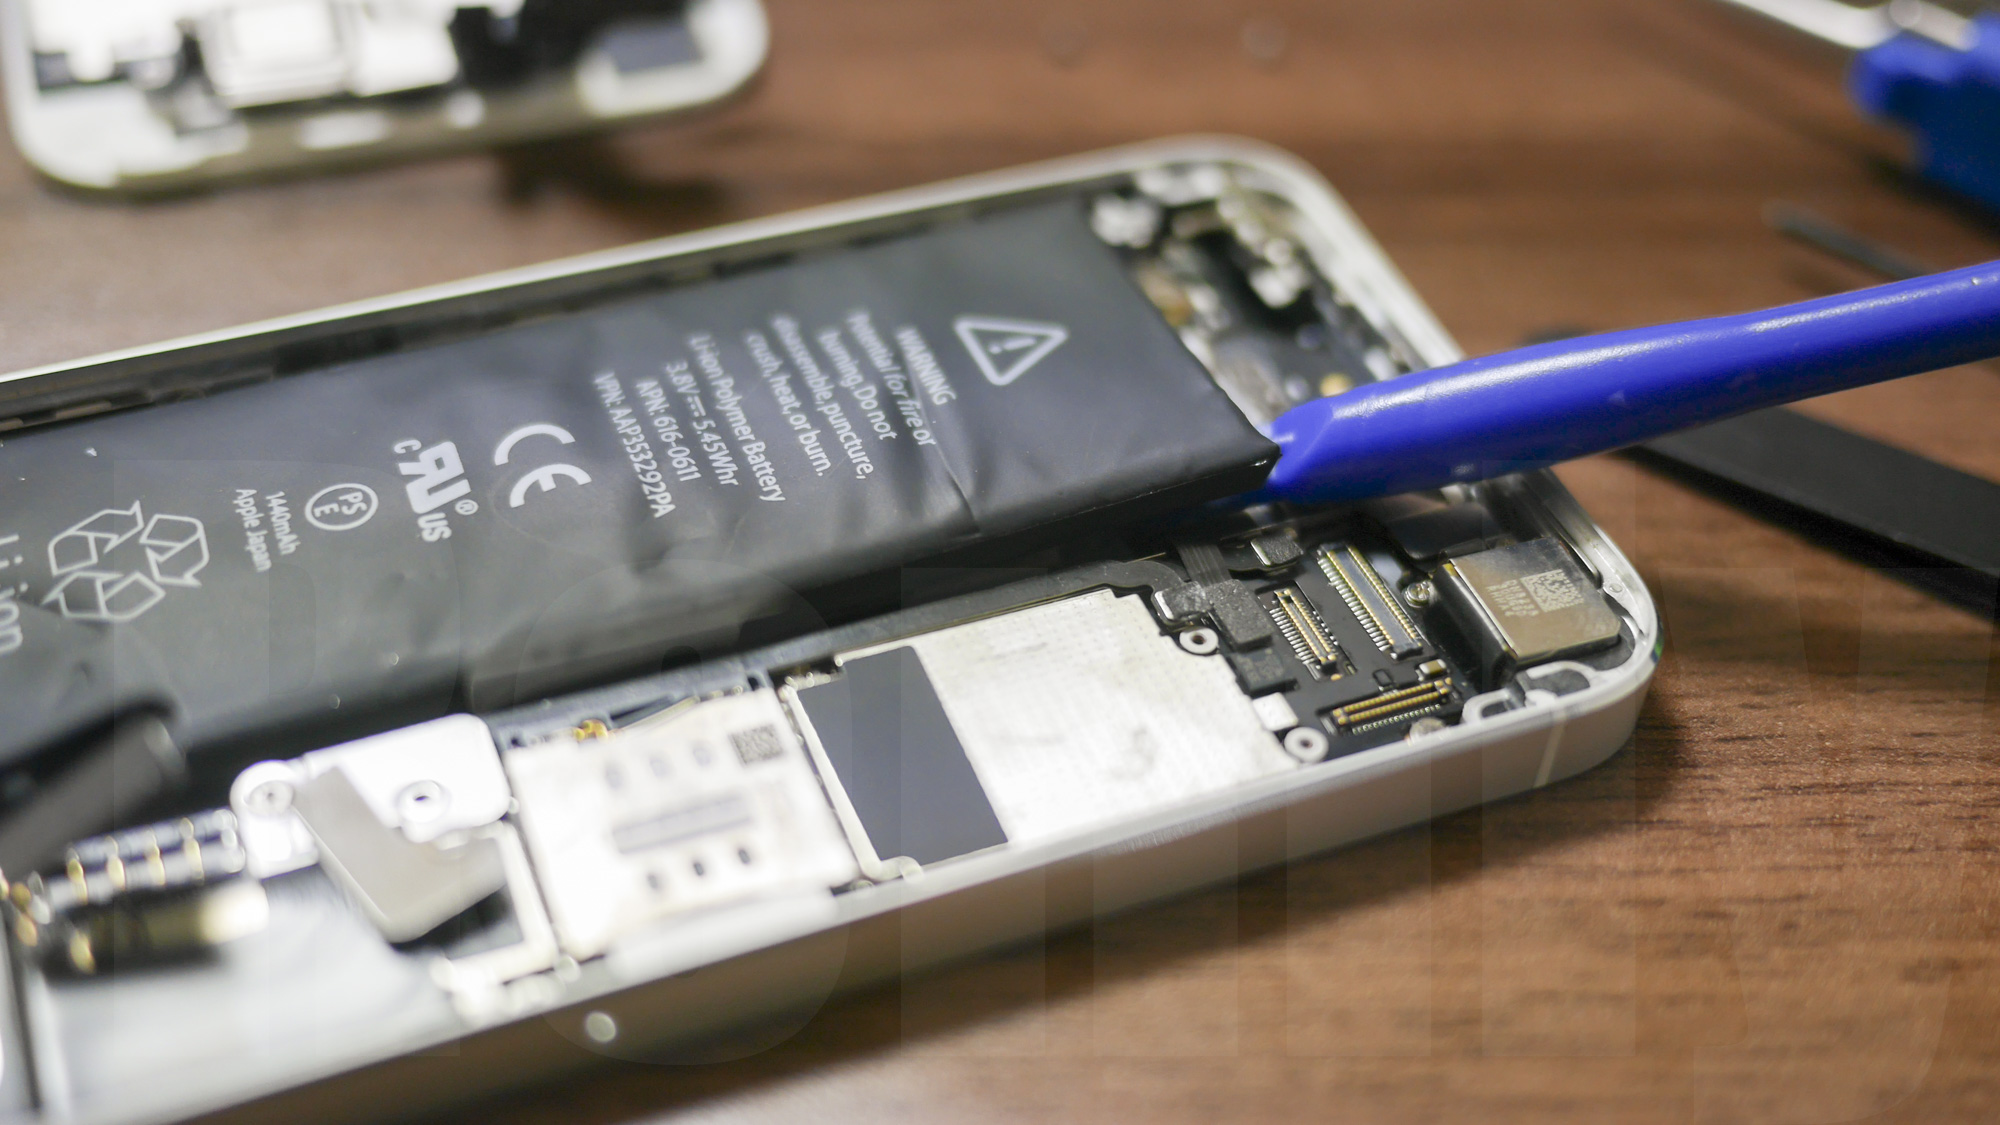 iPhone 5 Battery replacement: trying to remove battery